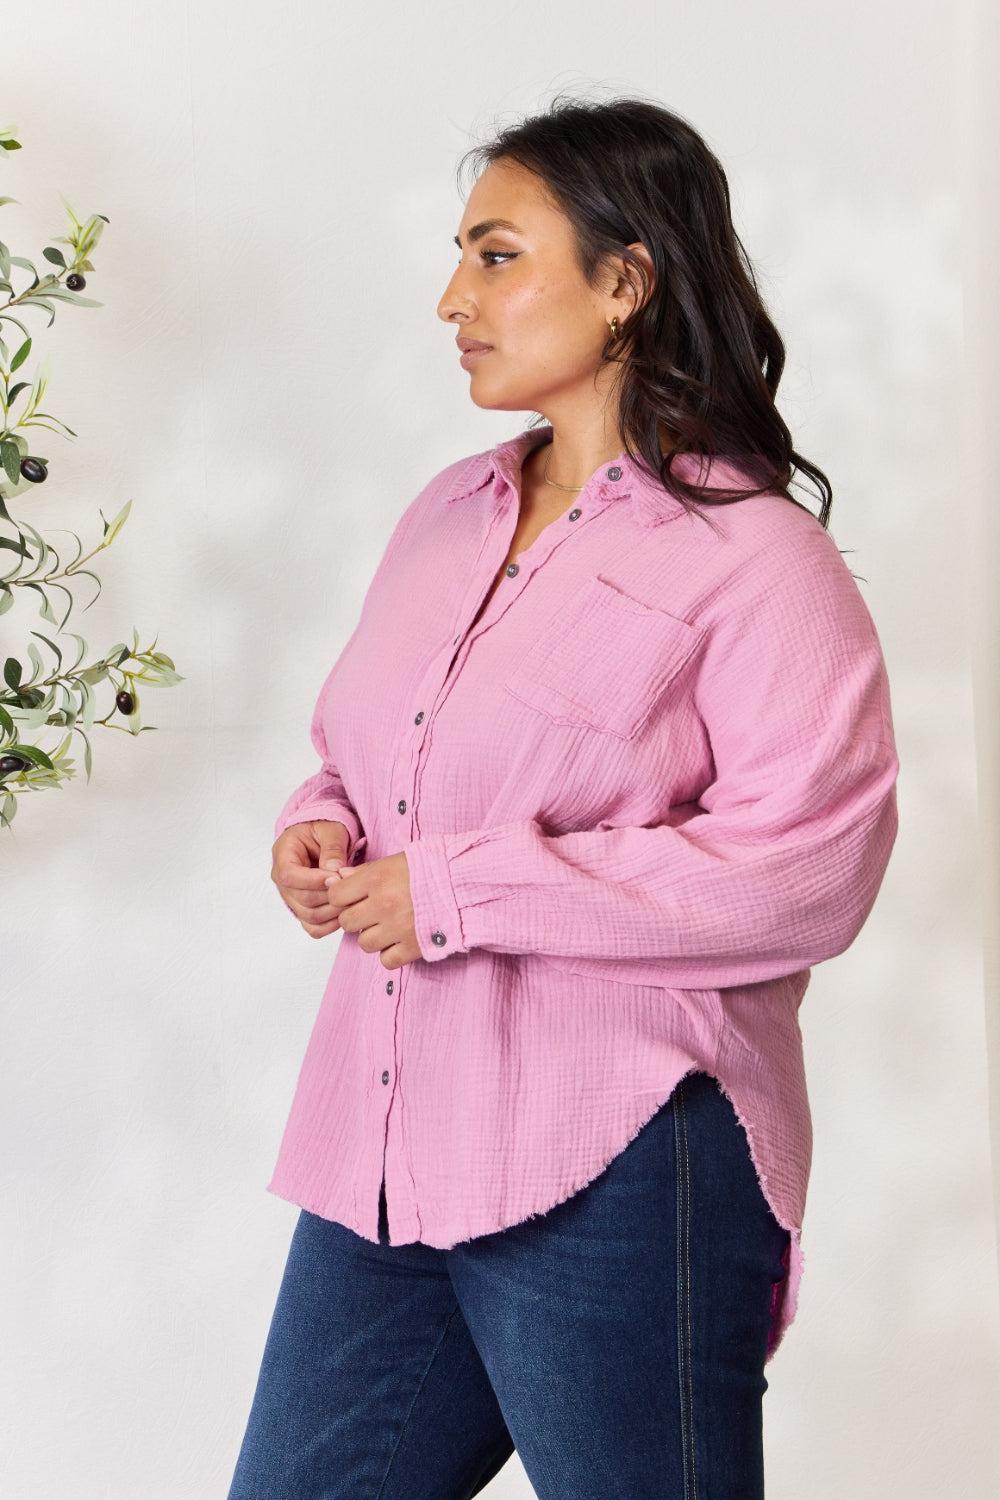 a woman in a pink shirt is standing in front of a plant